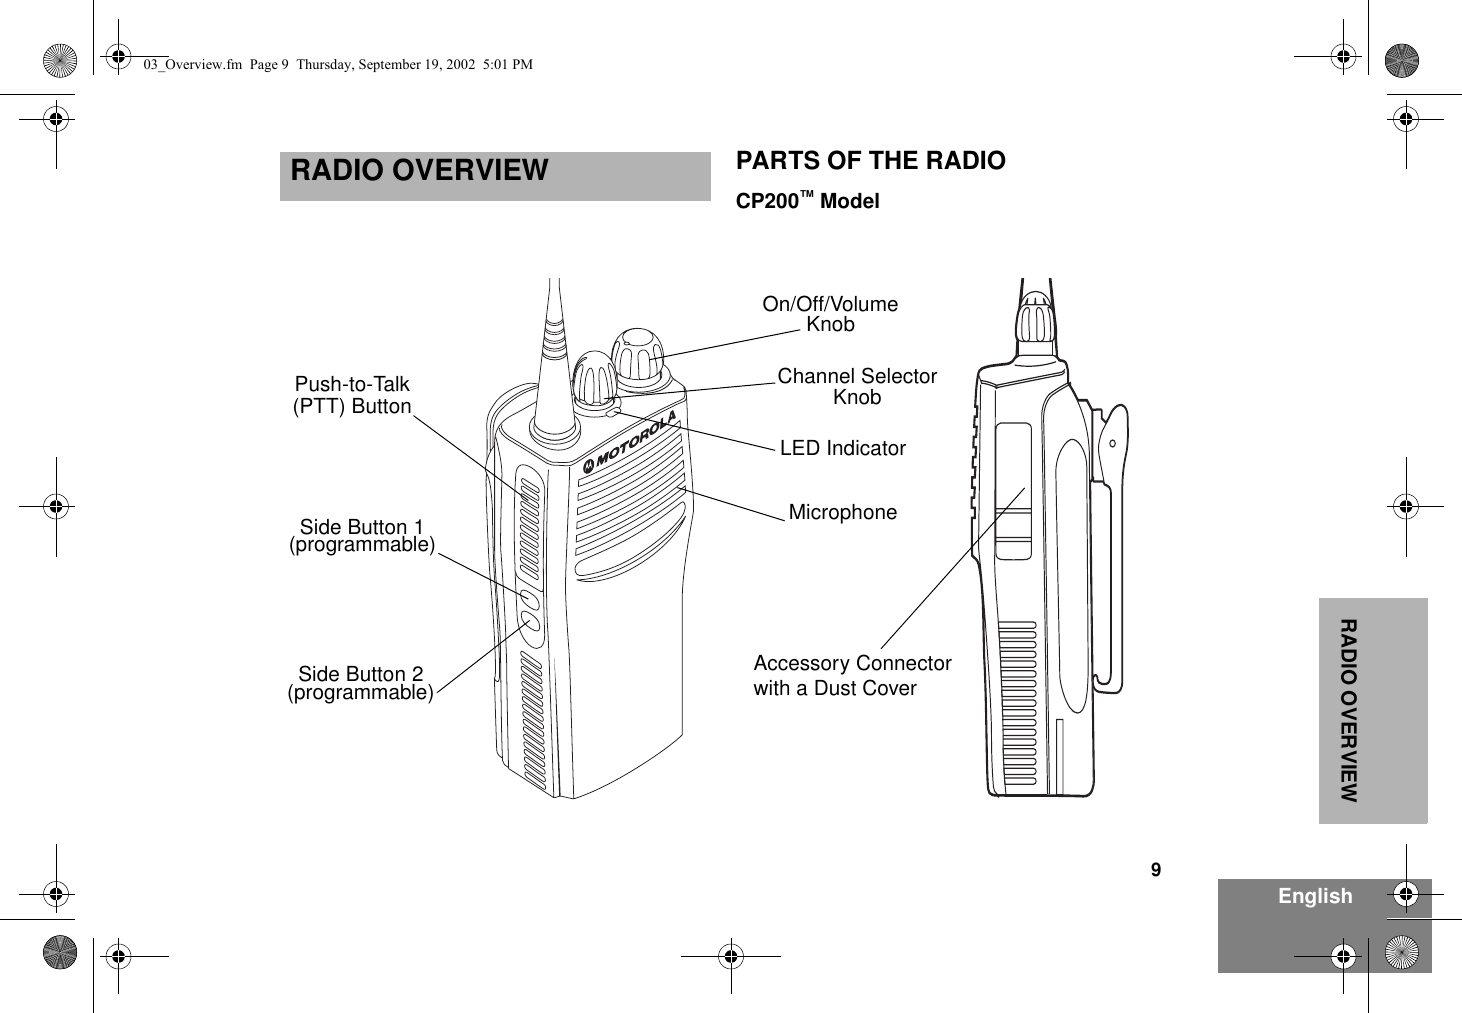 9EnglishRADIO OVERVIEWRADIO OVERVIEW PARTS OF THE RADIOCP200™ Model(programmable)Side Button 1Push-to-Talk(PTT) Button(programmable)Side Button 2 Accessory Connectorwith a Dust CoverLED IndicatorOn/Off/VolumeKnobChannel SelectorKnobMicrophone03_Overview.fm  Page 9  Thursday, September 19, 2002  5:01 PM